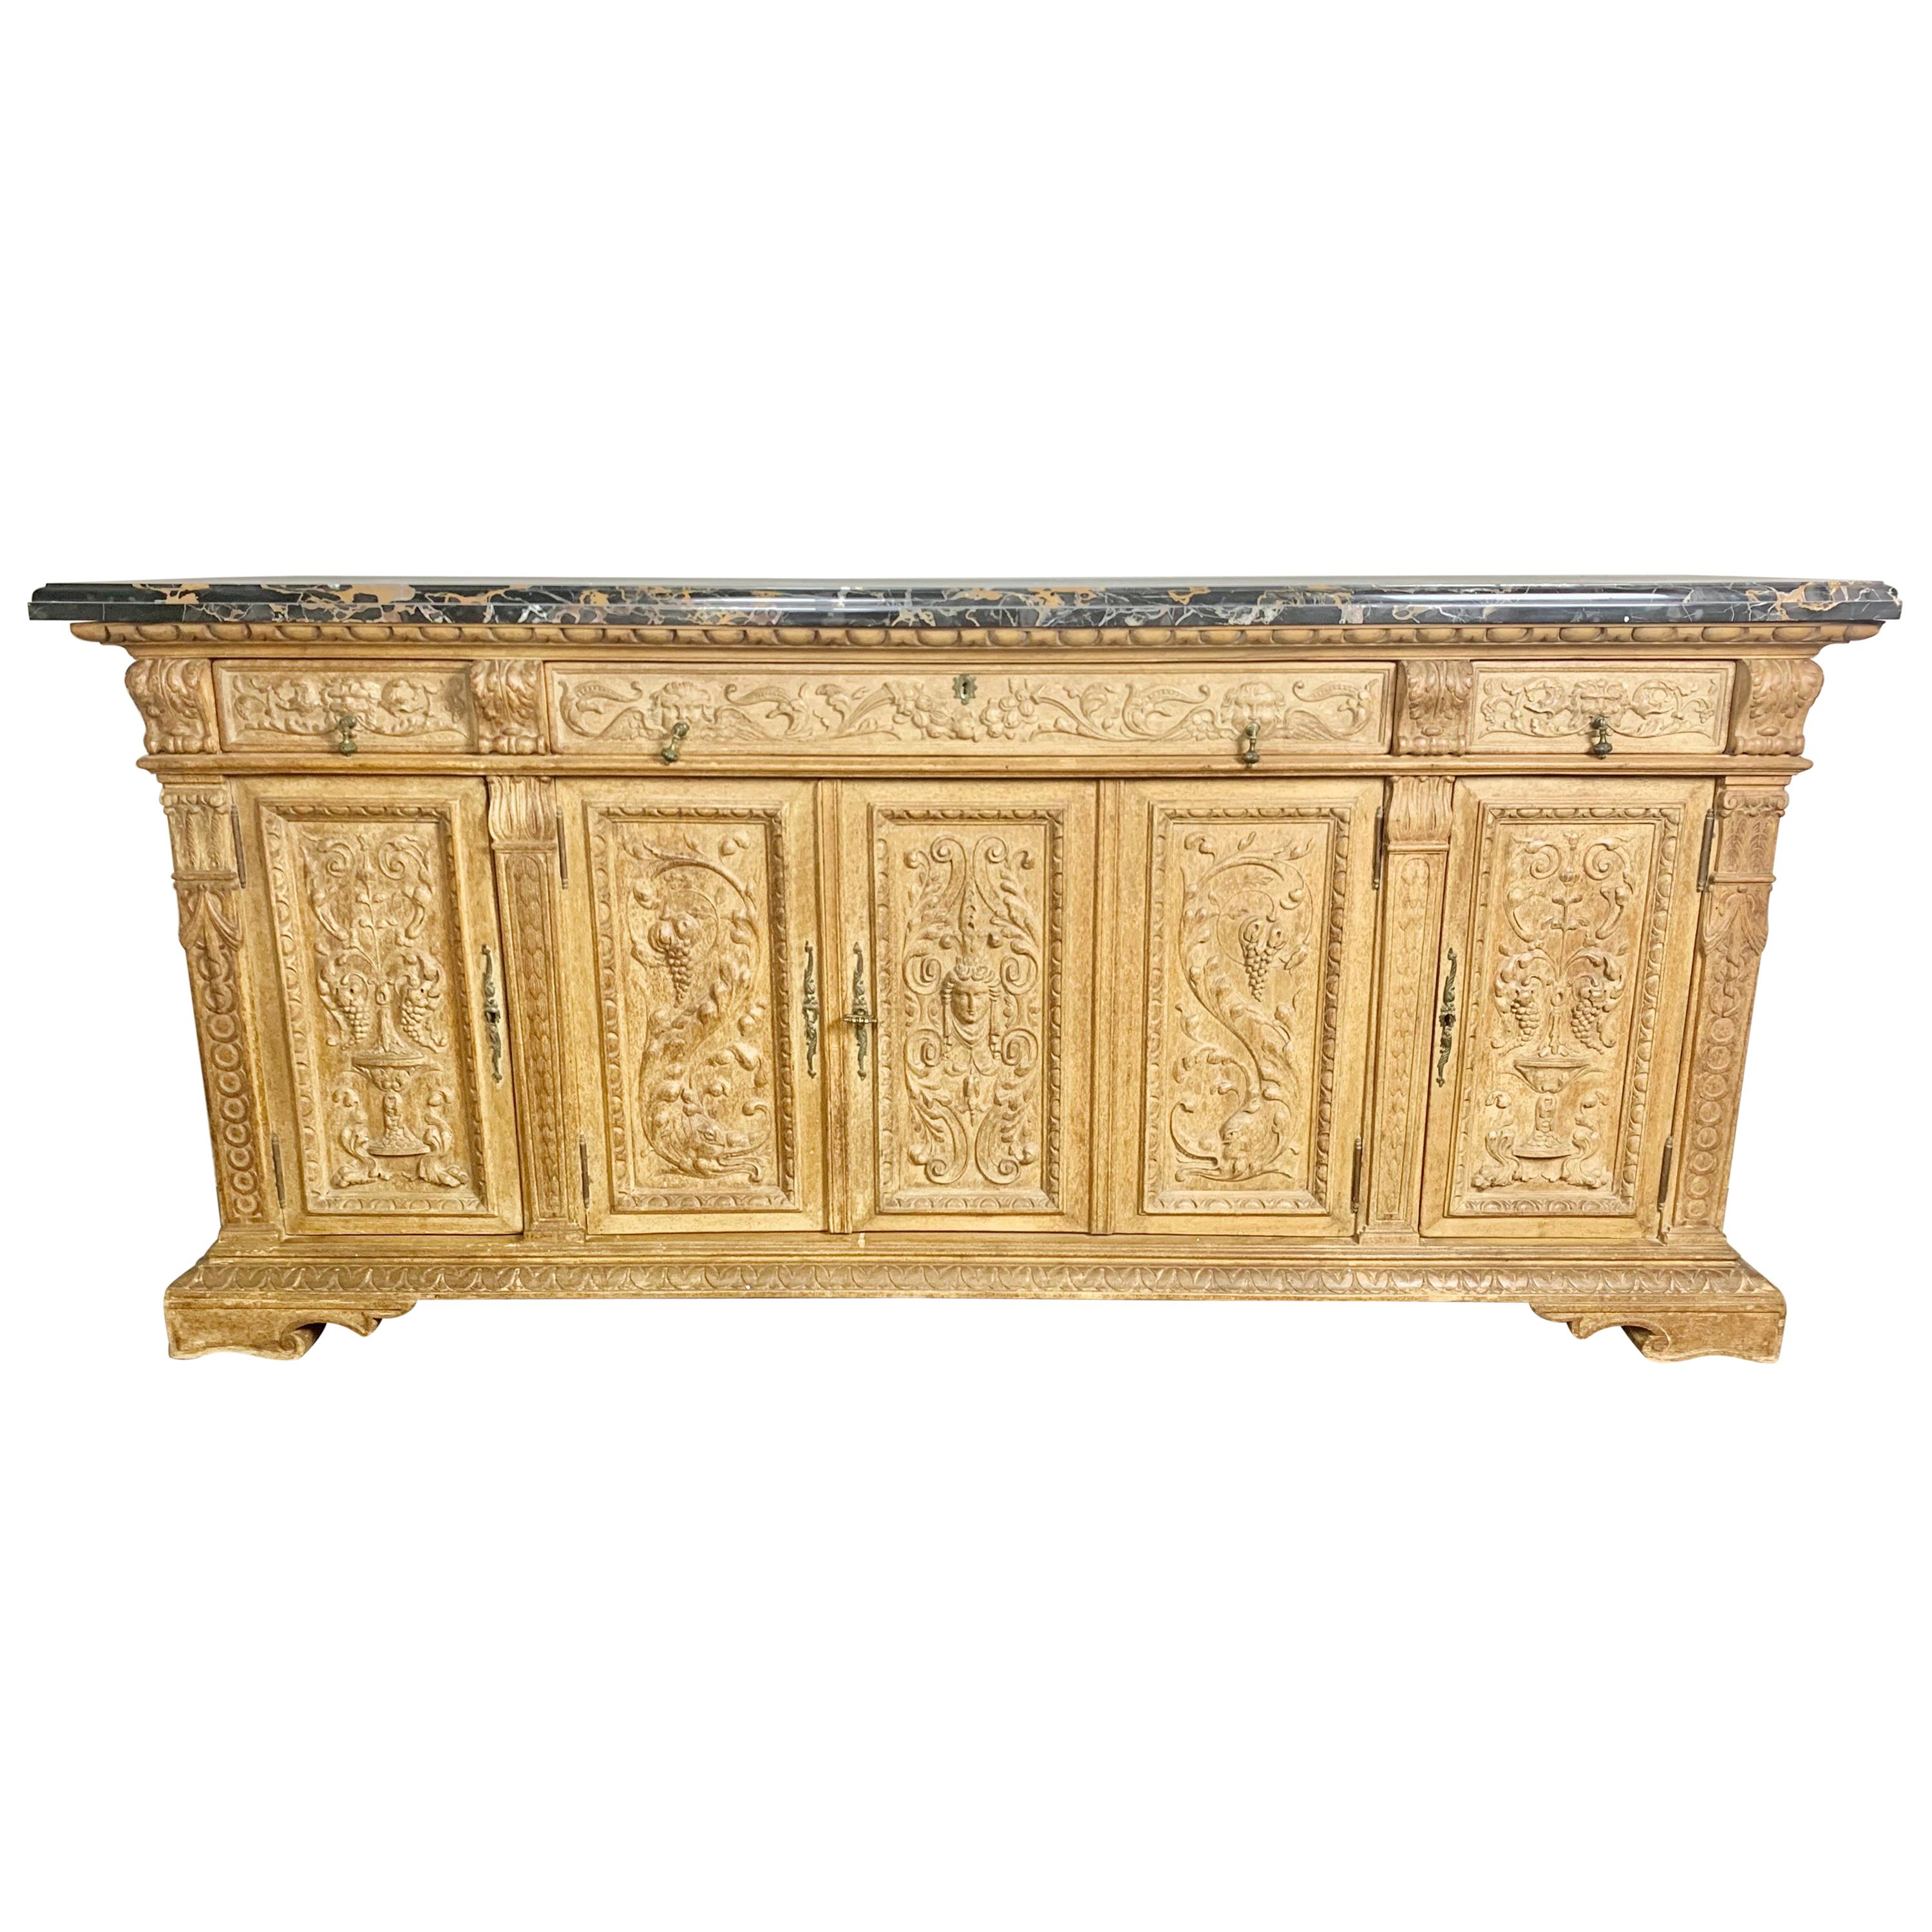 Italian Bleached Walnut Credenza with Marble Top, circa 1900